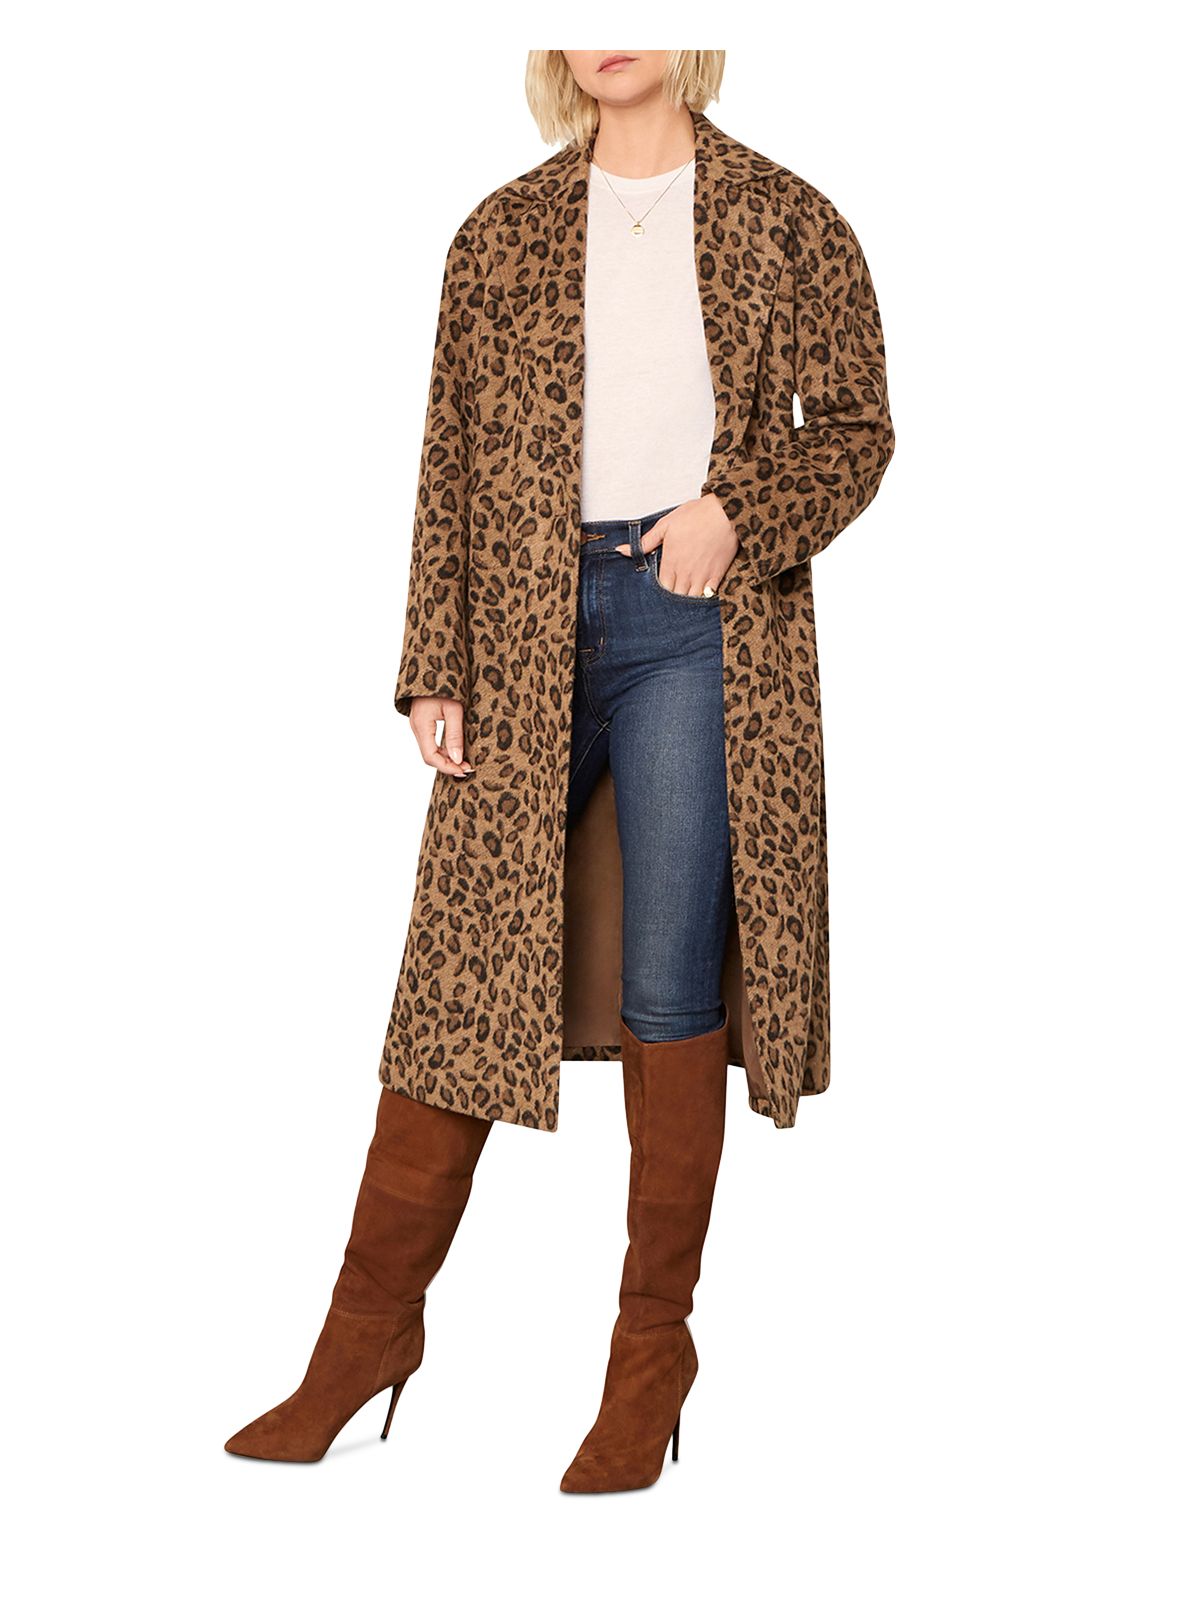 CUPCAKES AND CASHMERE Womens Brown Pocketed Button Down Animal Print Duster Winter Jacket Coat XS